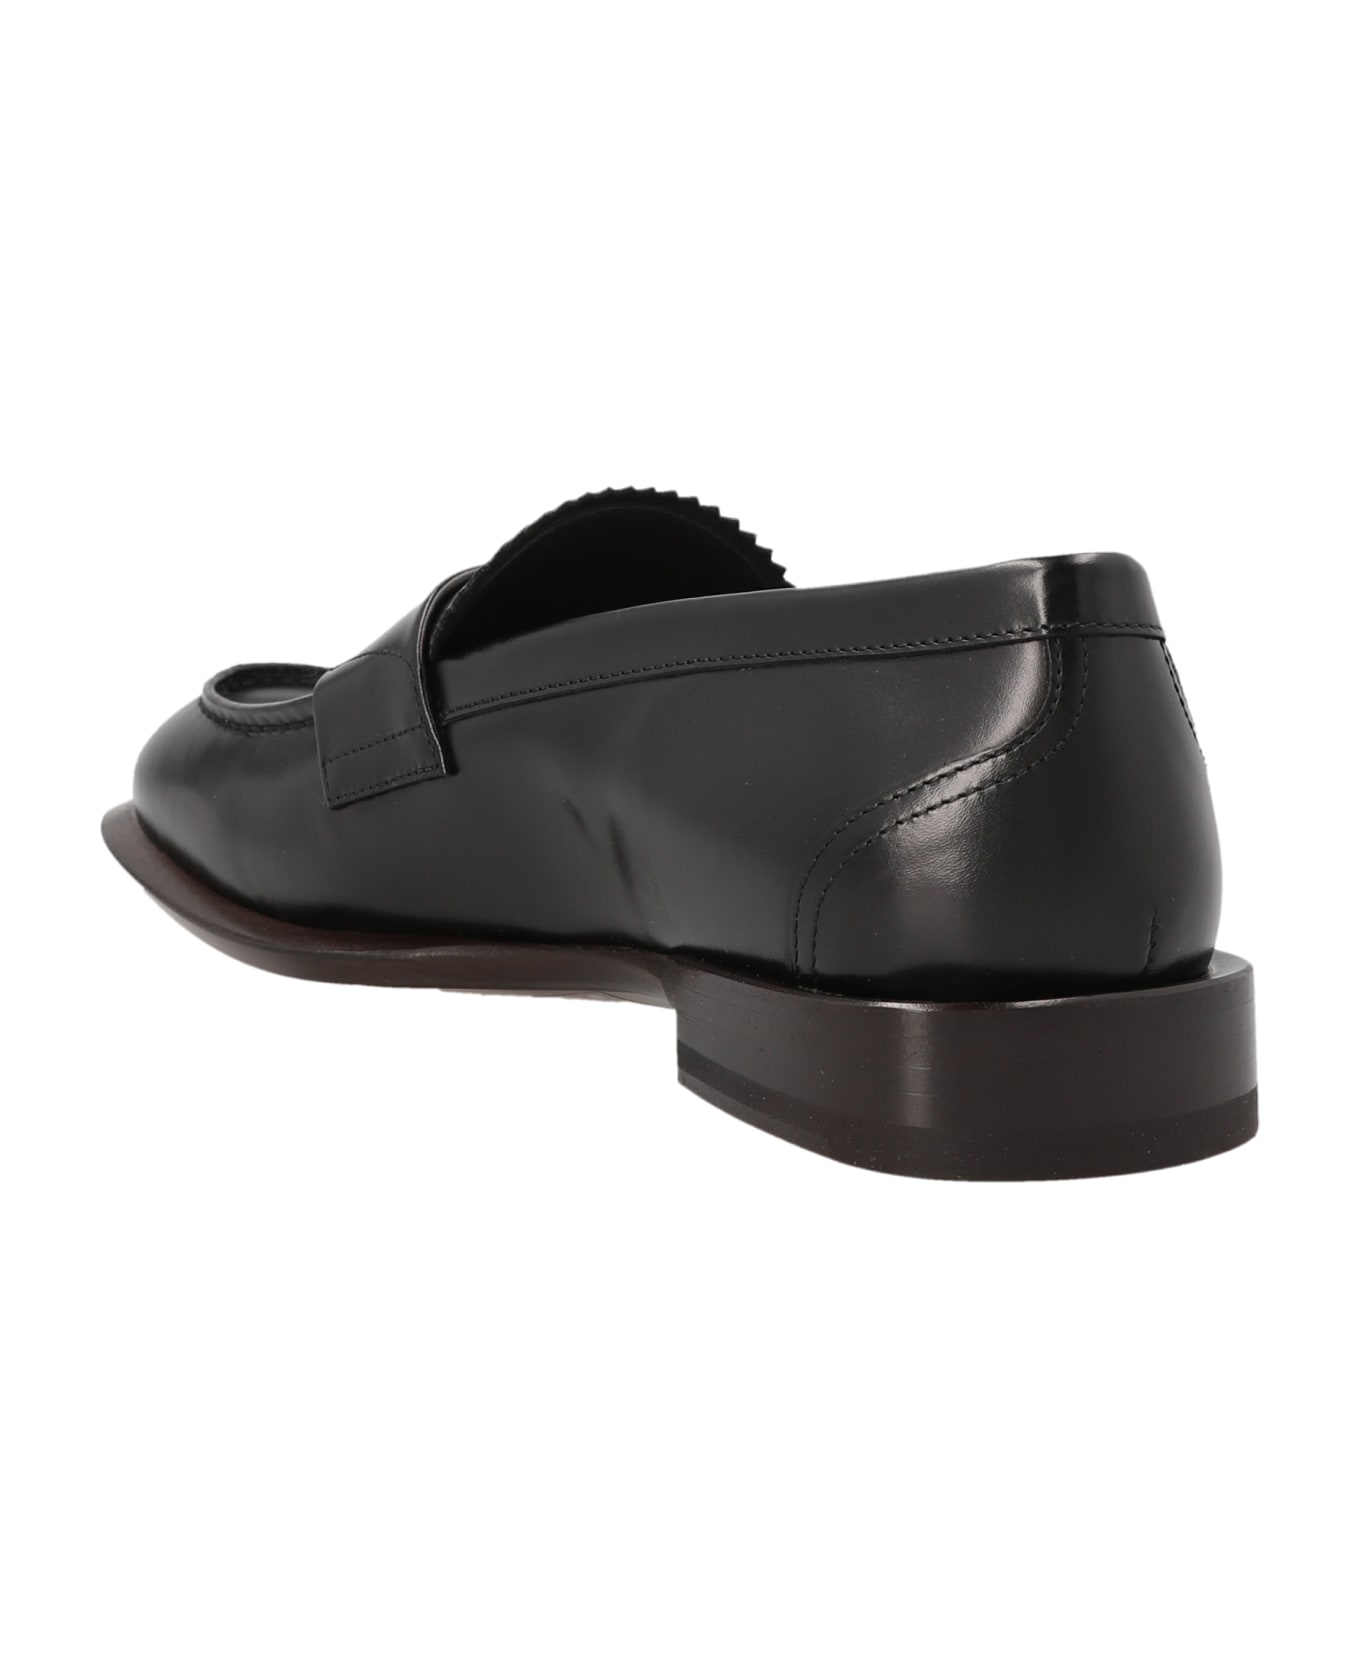 Alexander McQueen Leather Loafers - Black ローファー＆デッキシューズ